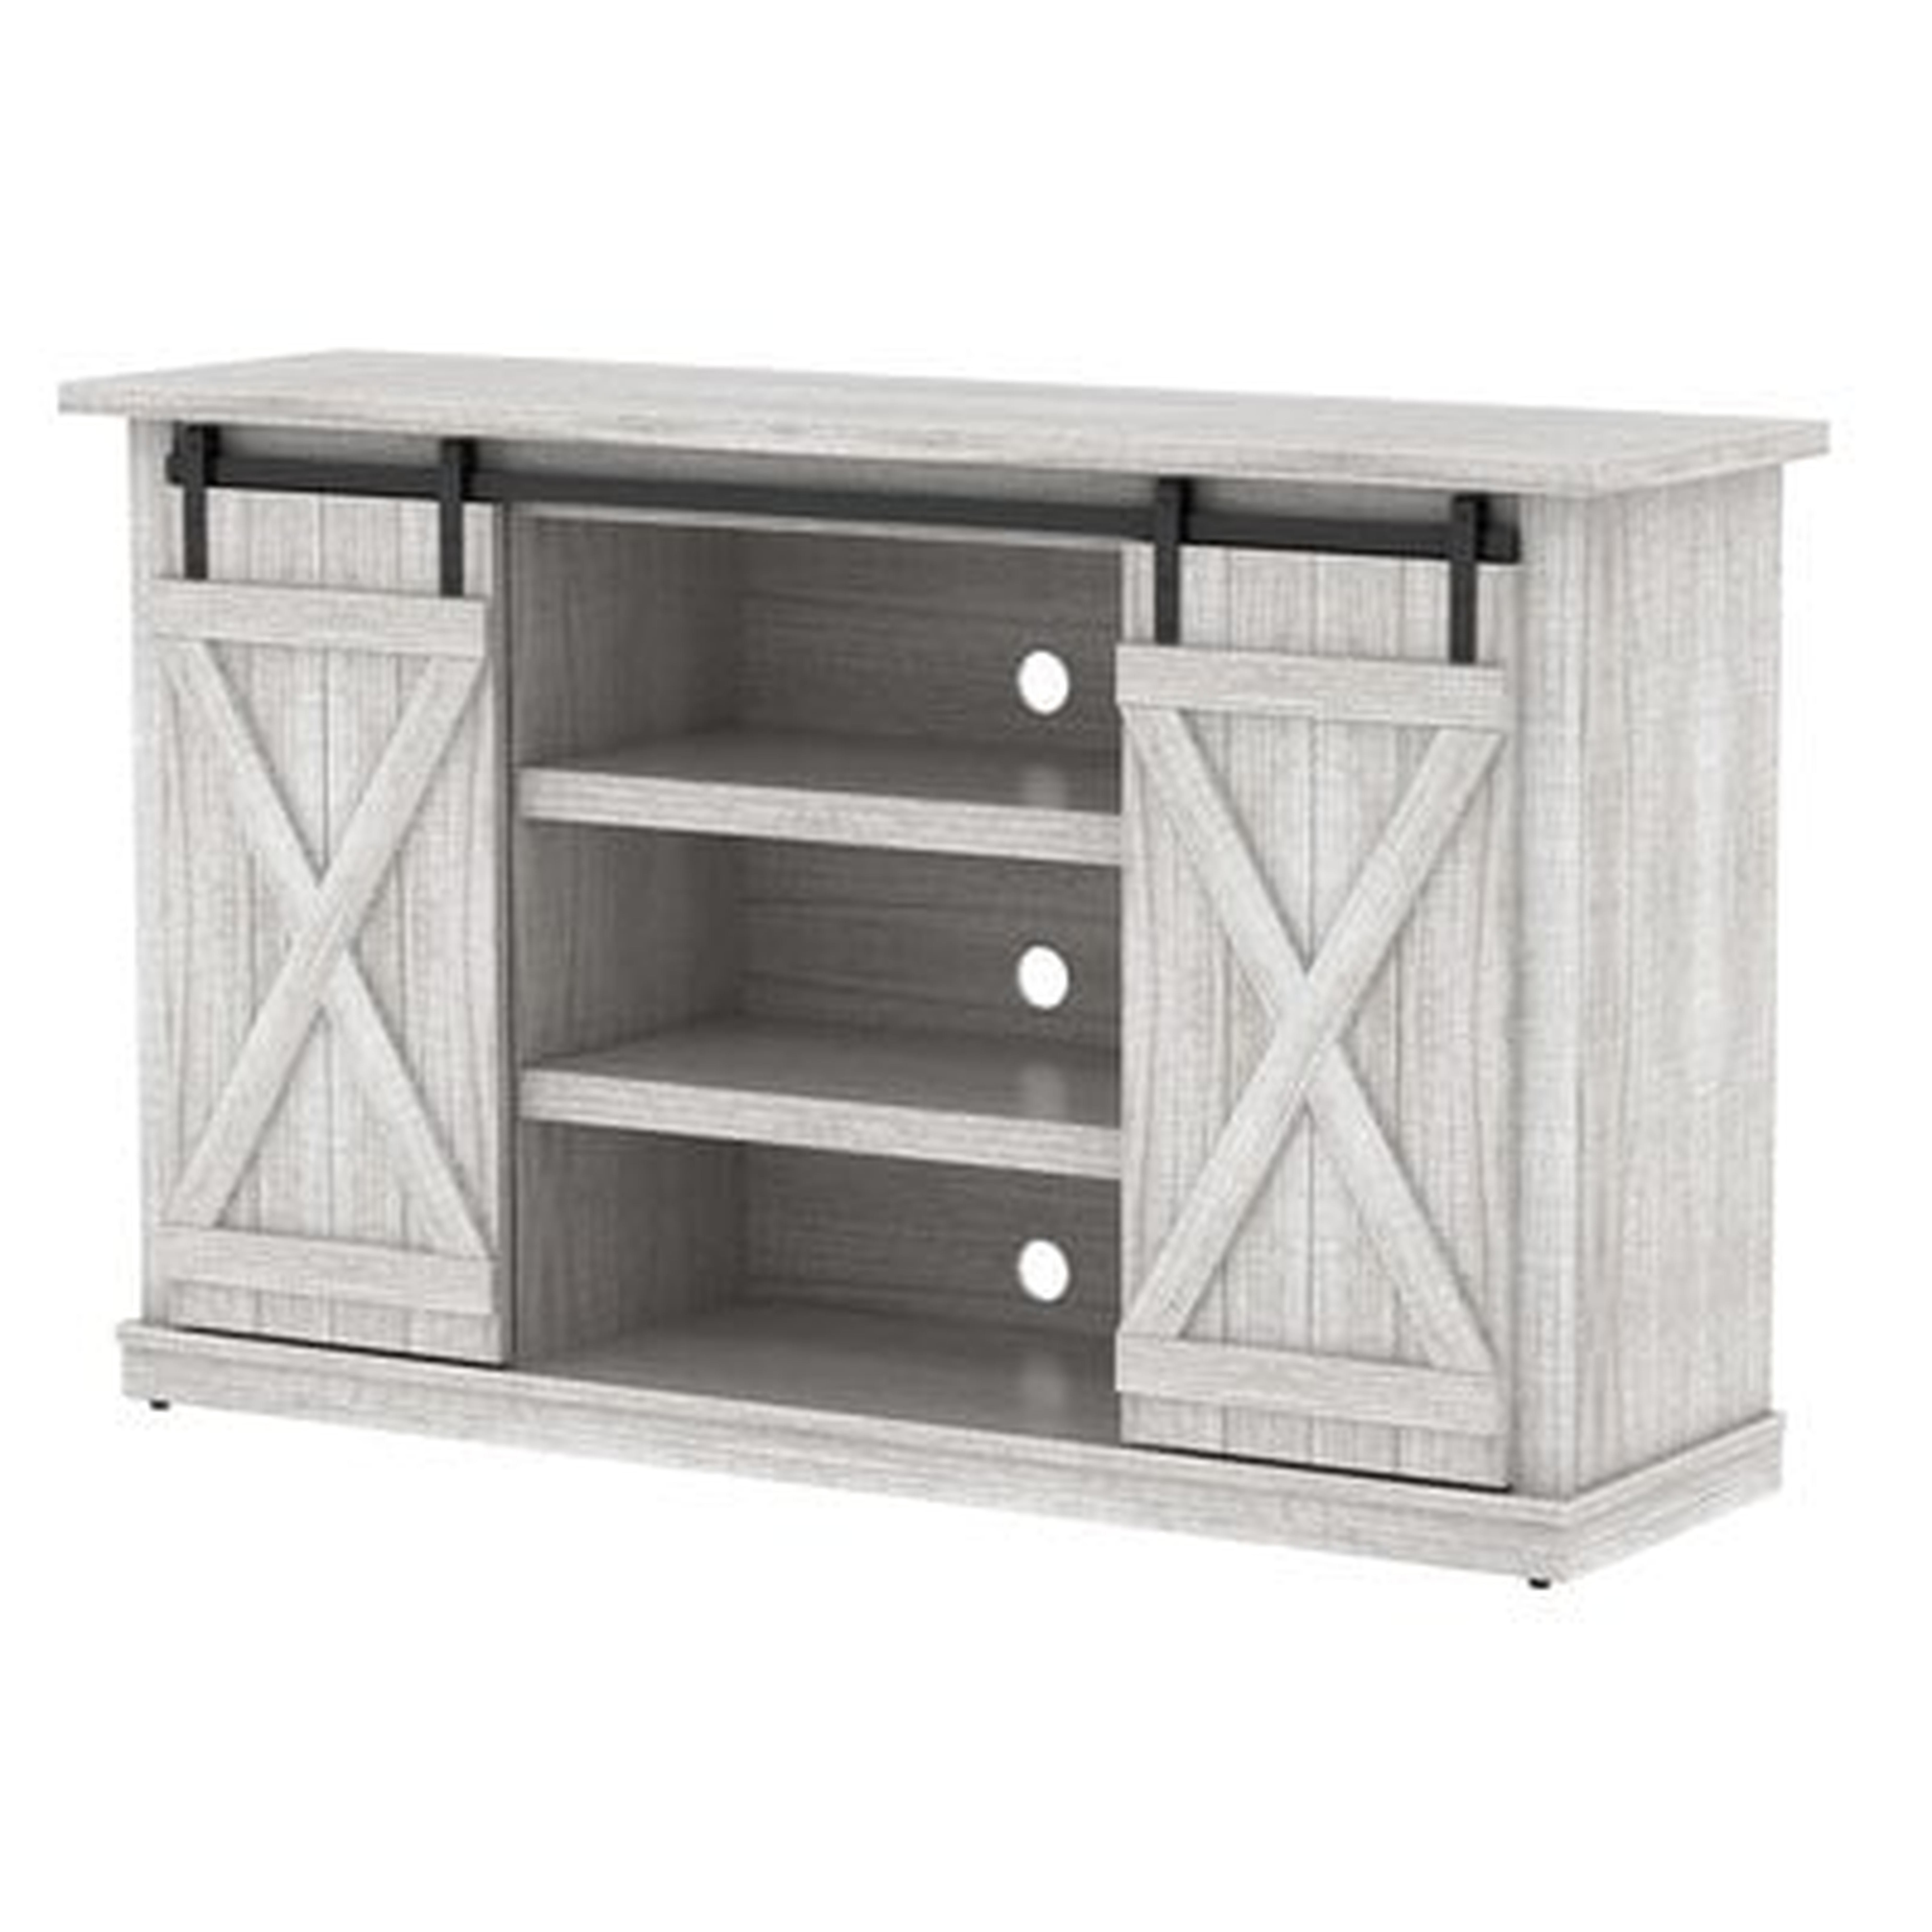 Lorraine TV Stand for TVs up to 60 inches - Birch Lane